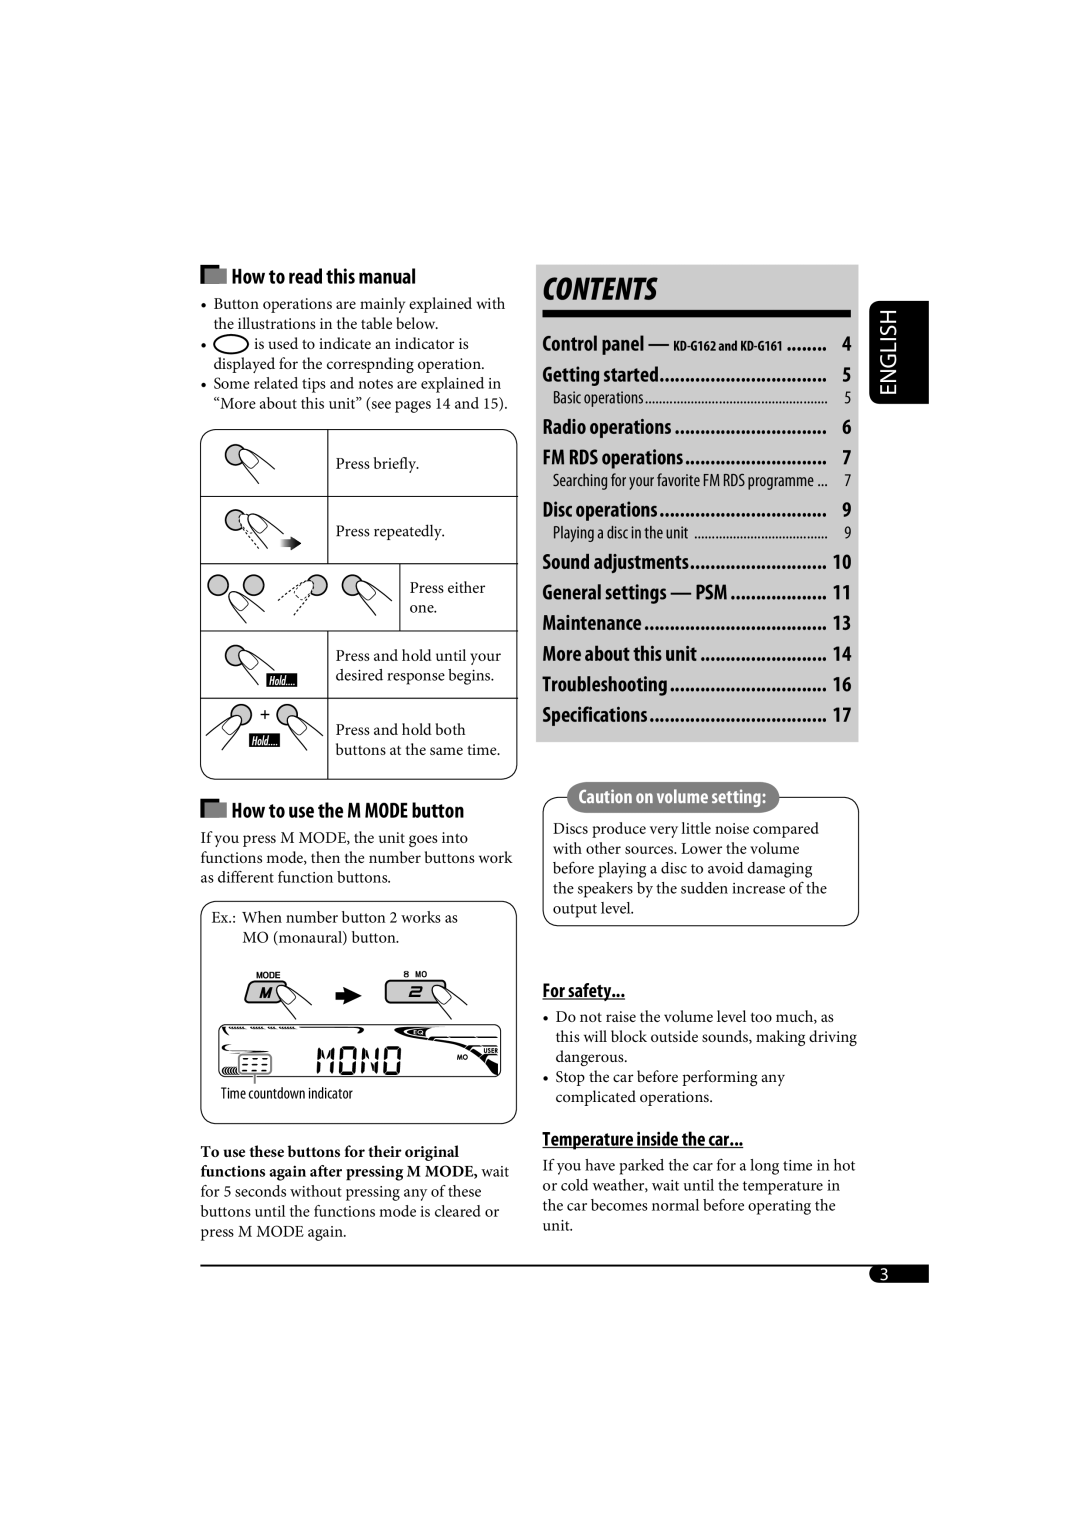 JVC kd-g162 How to read this manual, How to use the M MODE button, For safety, Temperature inside the car, Contents 